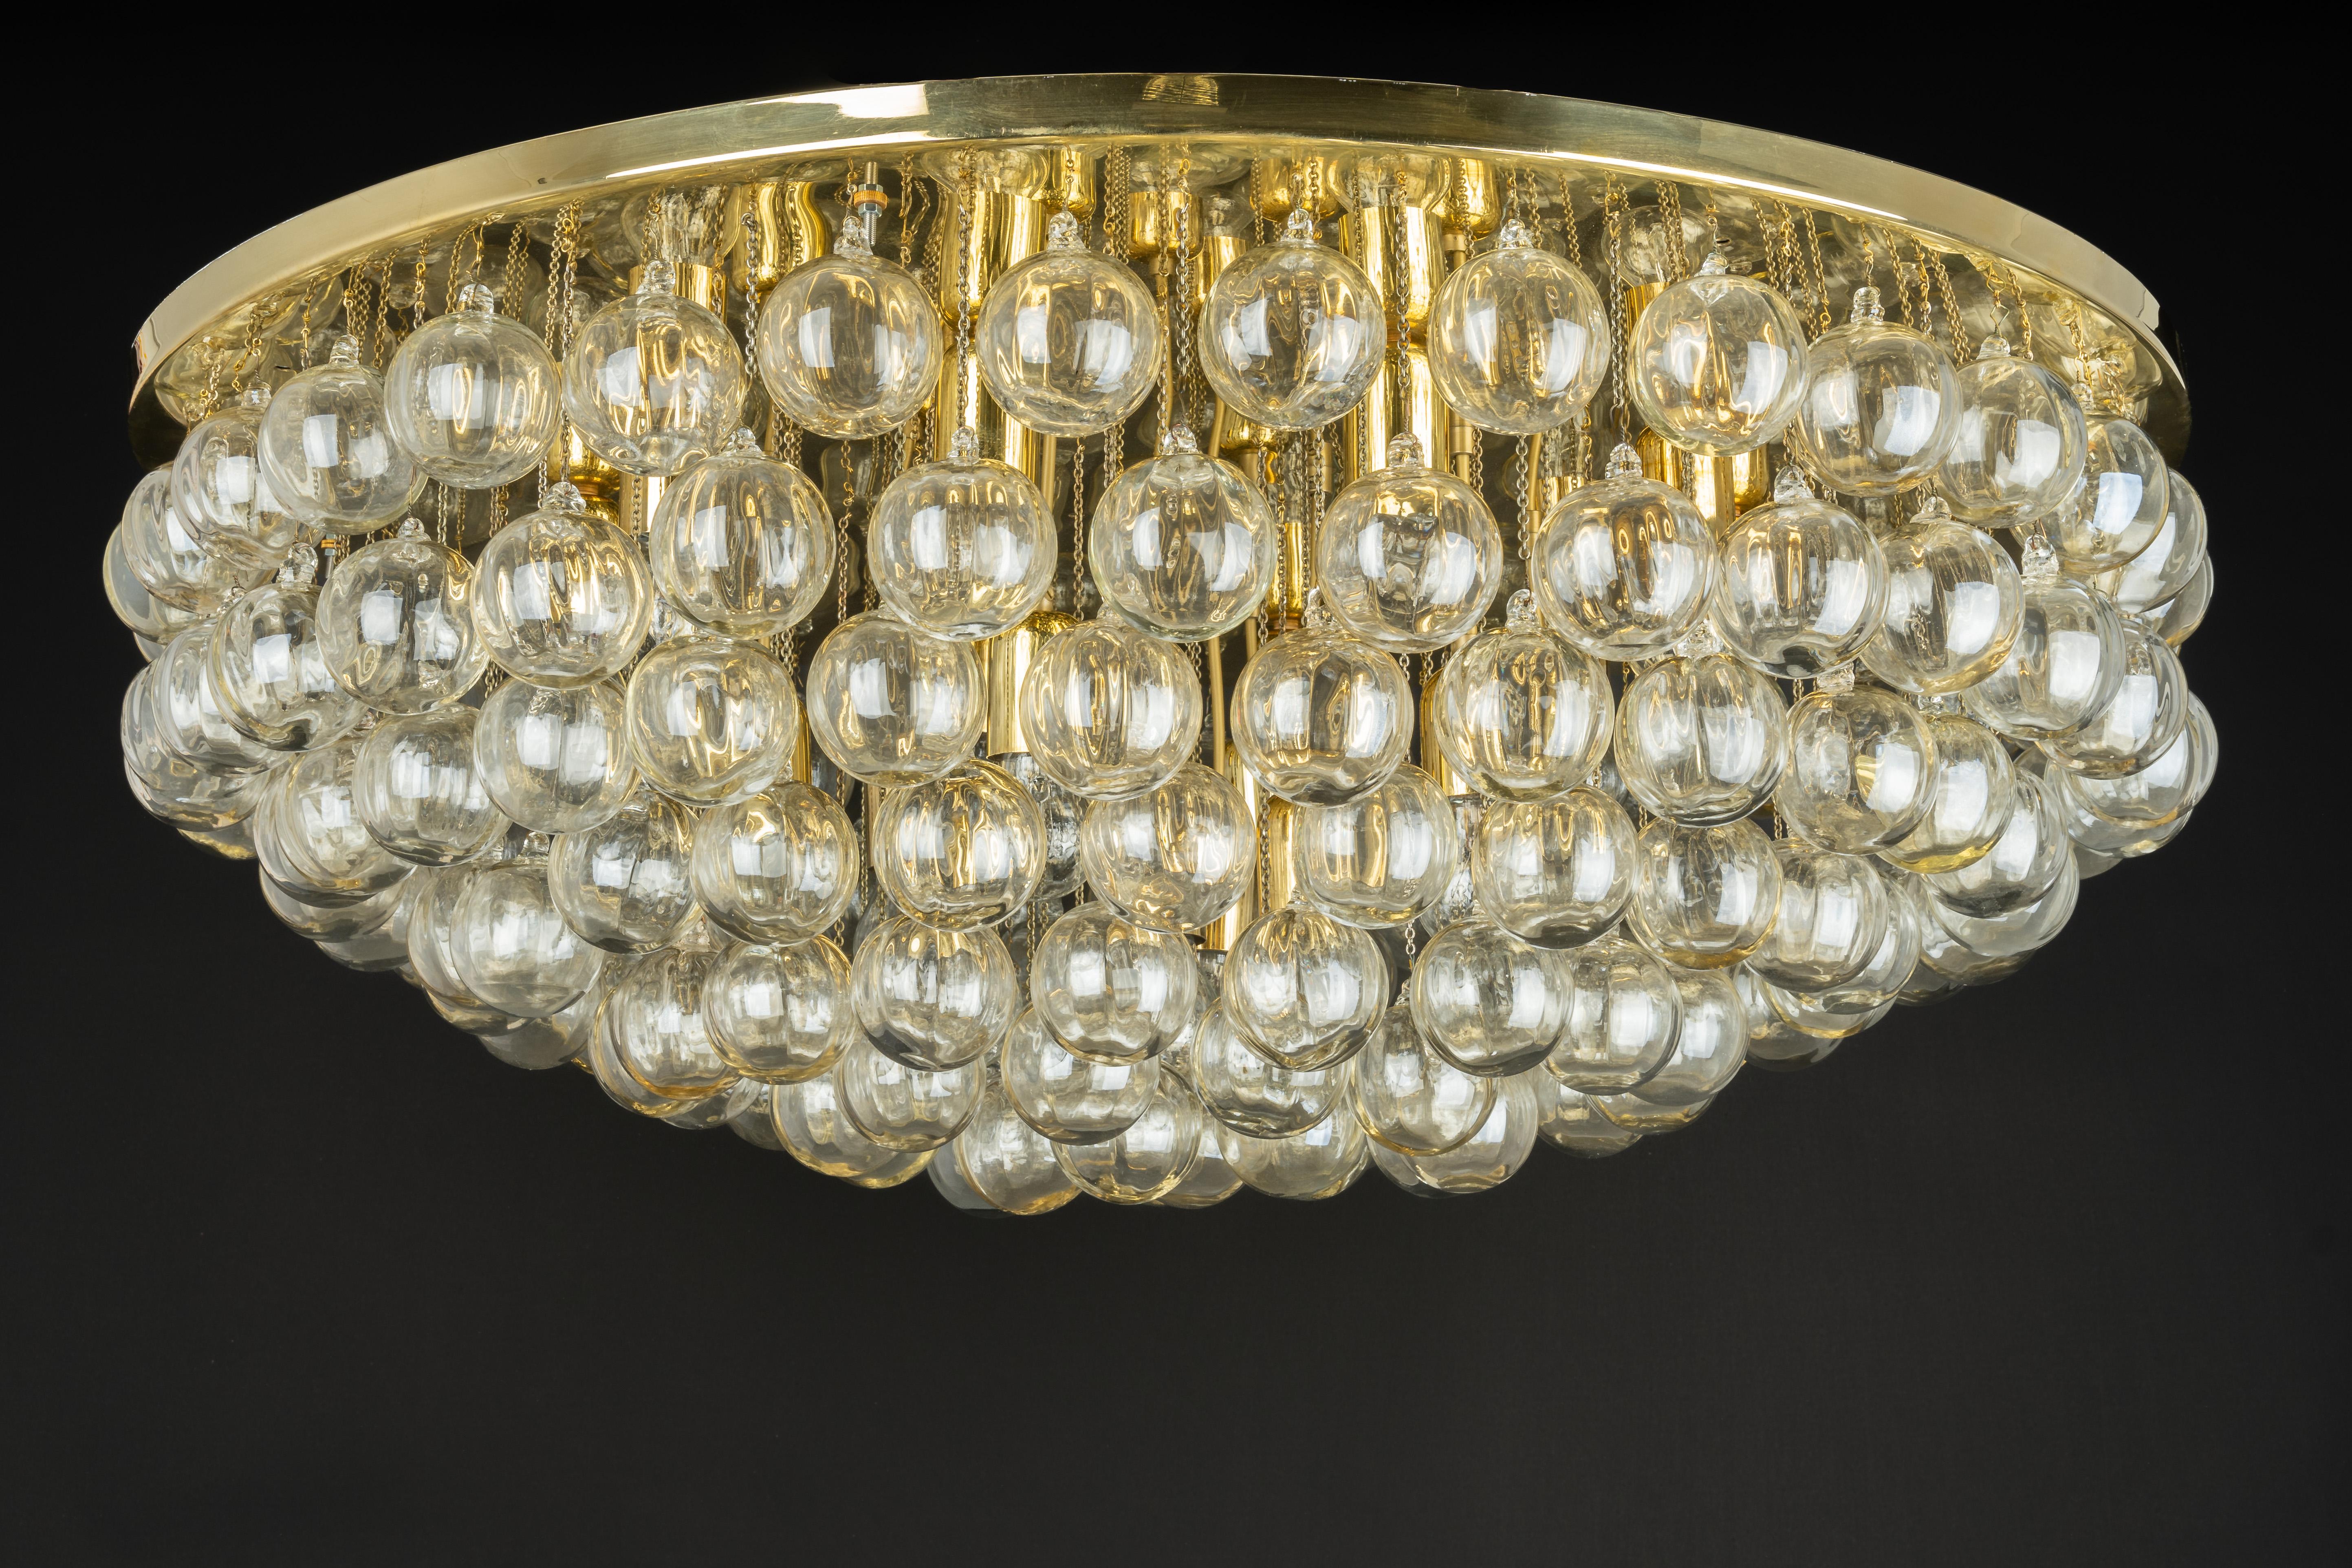 1 of 2 Extra Large Murano Glass Chandelier, Christoph Palme, Germany, 1970s For Sale 5